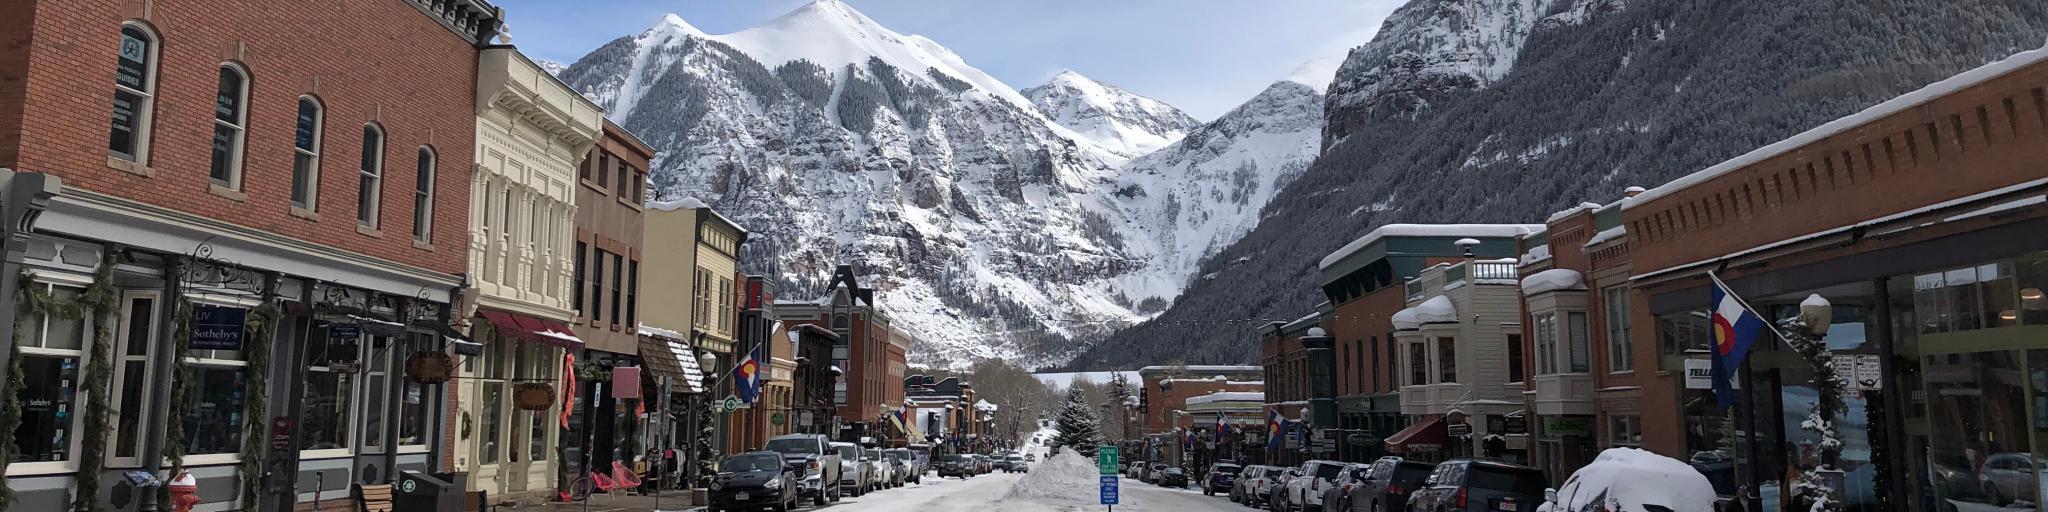 A street view in Telluride, Colorado where snow is on the road and some buildings are on the both sides of the road. The San Juan mountain can be seen on the background.t.